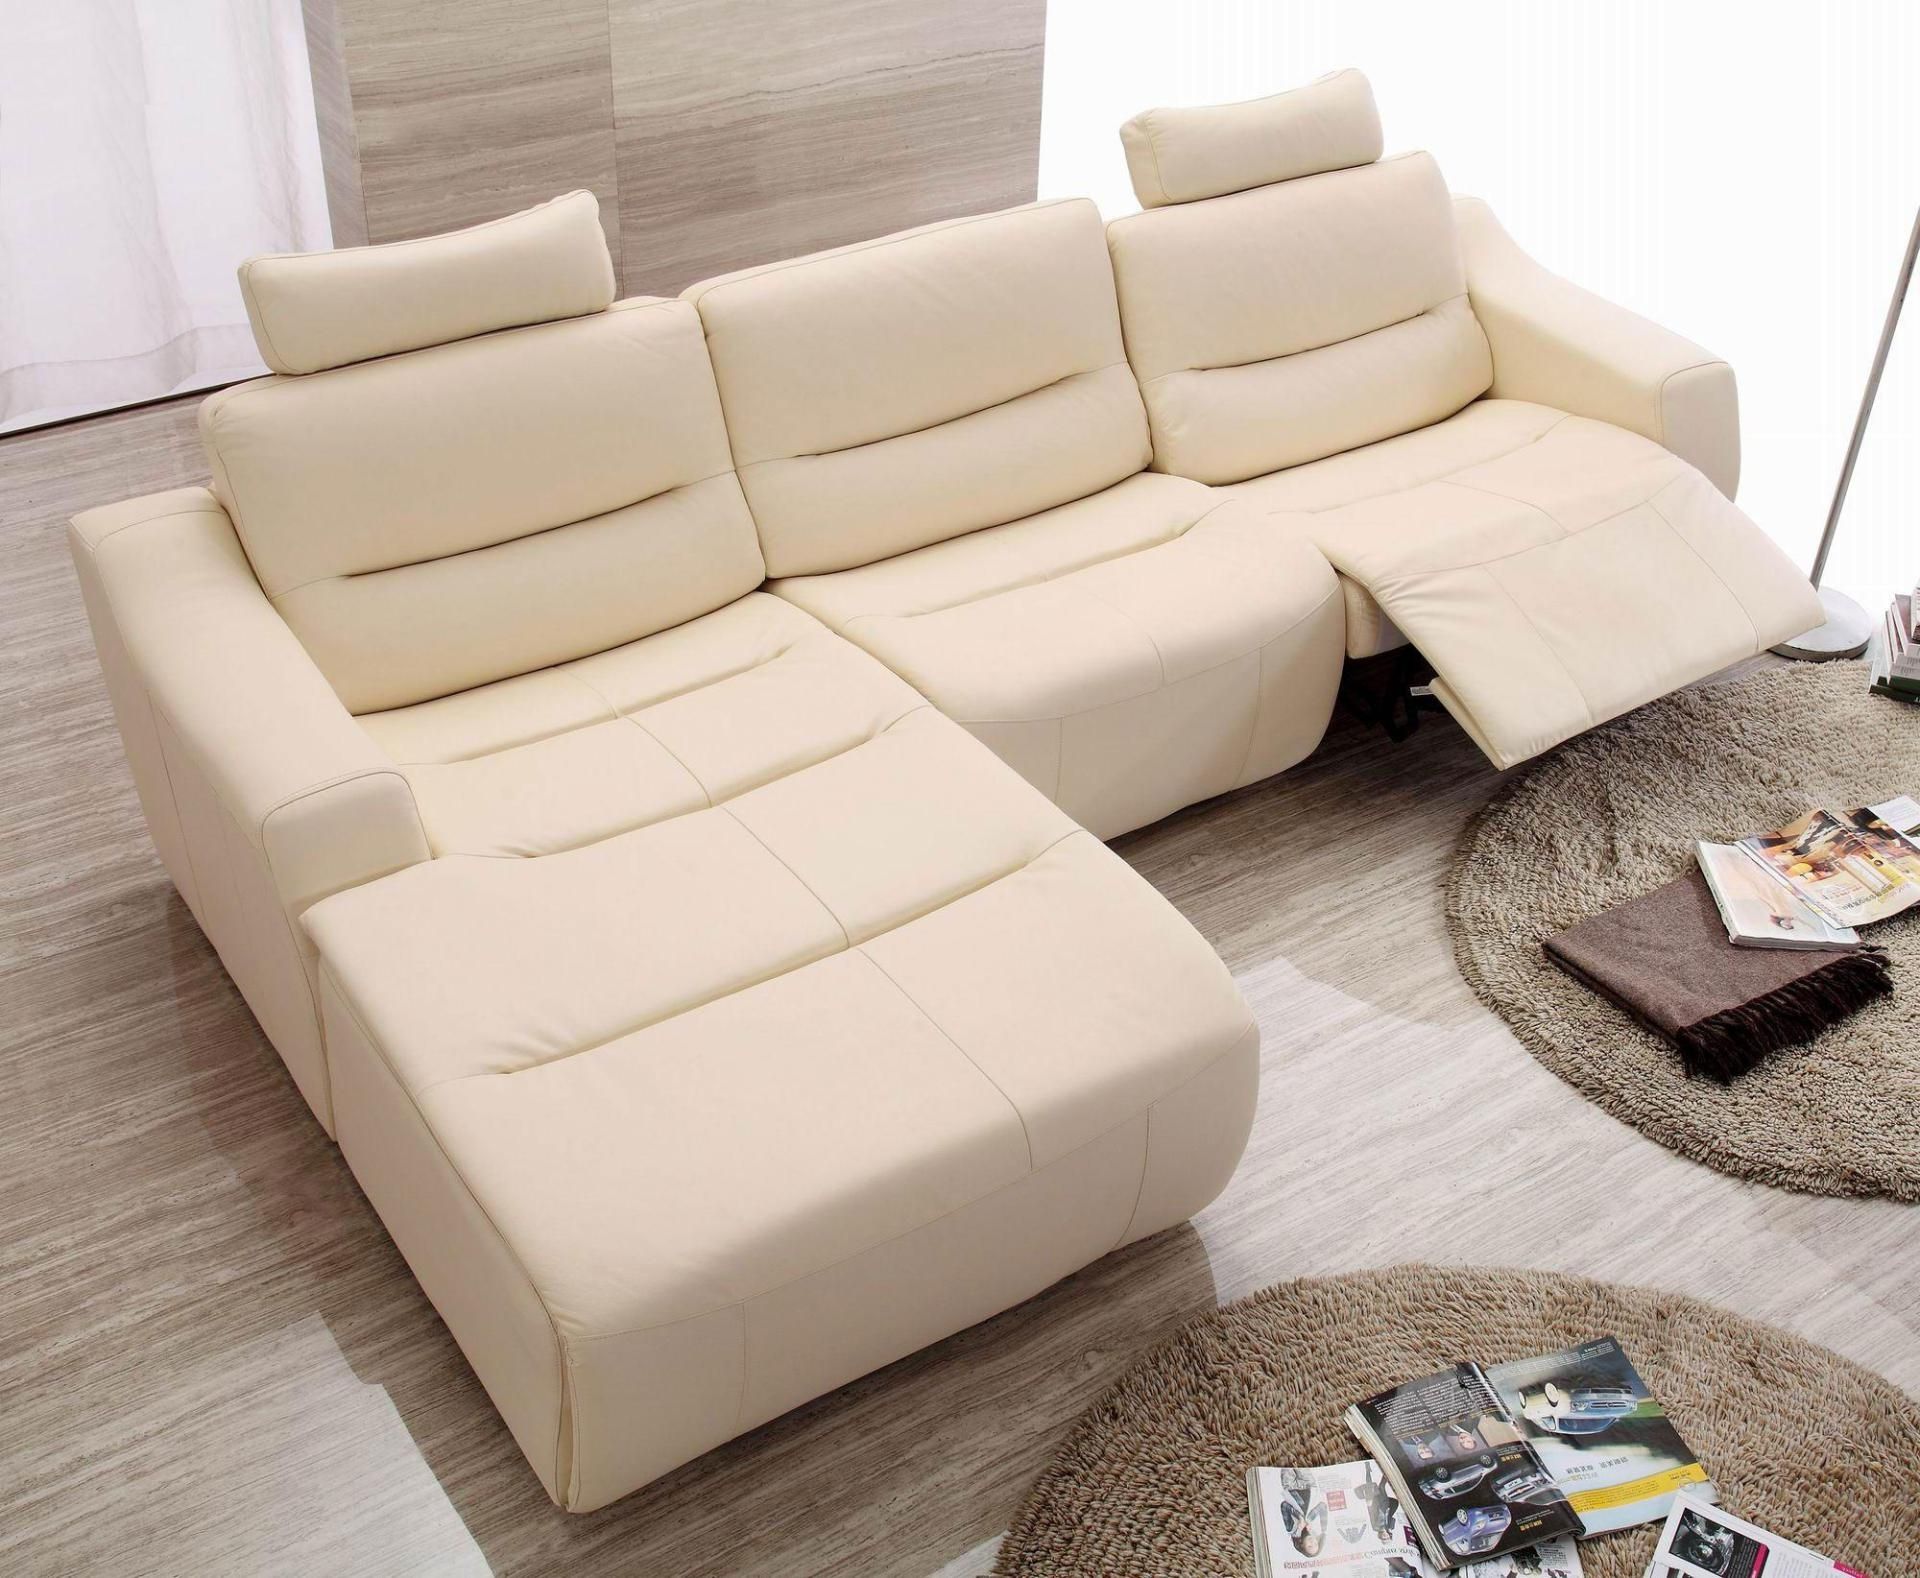 Small Sectional Sofas For Small Spaces Throughout Most Recently Released Small Corner Sectional Couch, Small Sectional Sofas For Small (View 9 of 15)